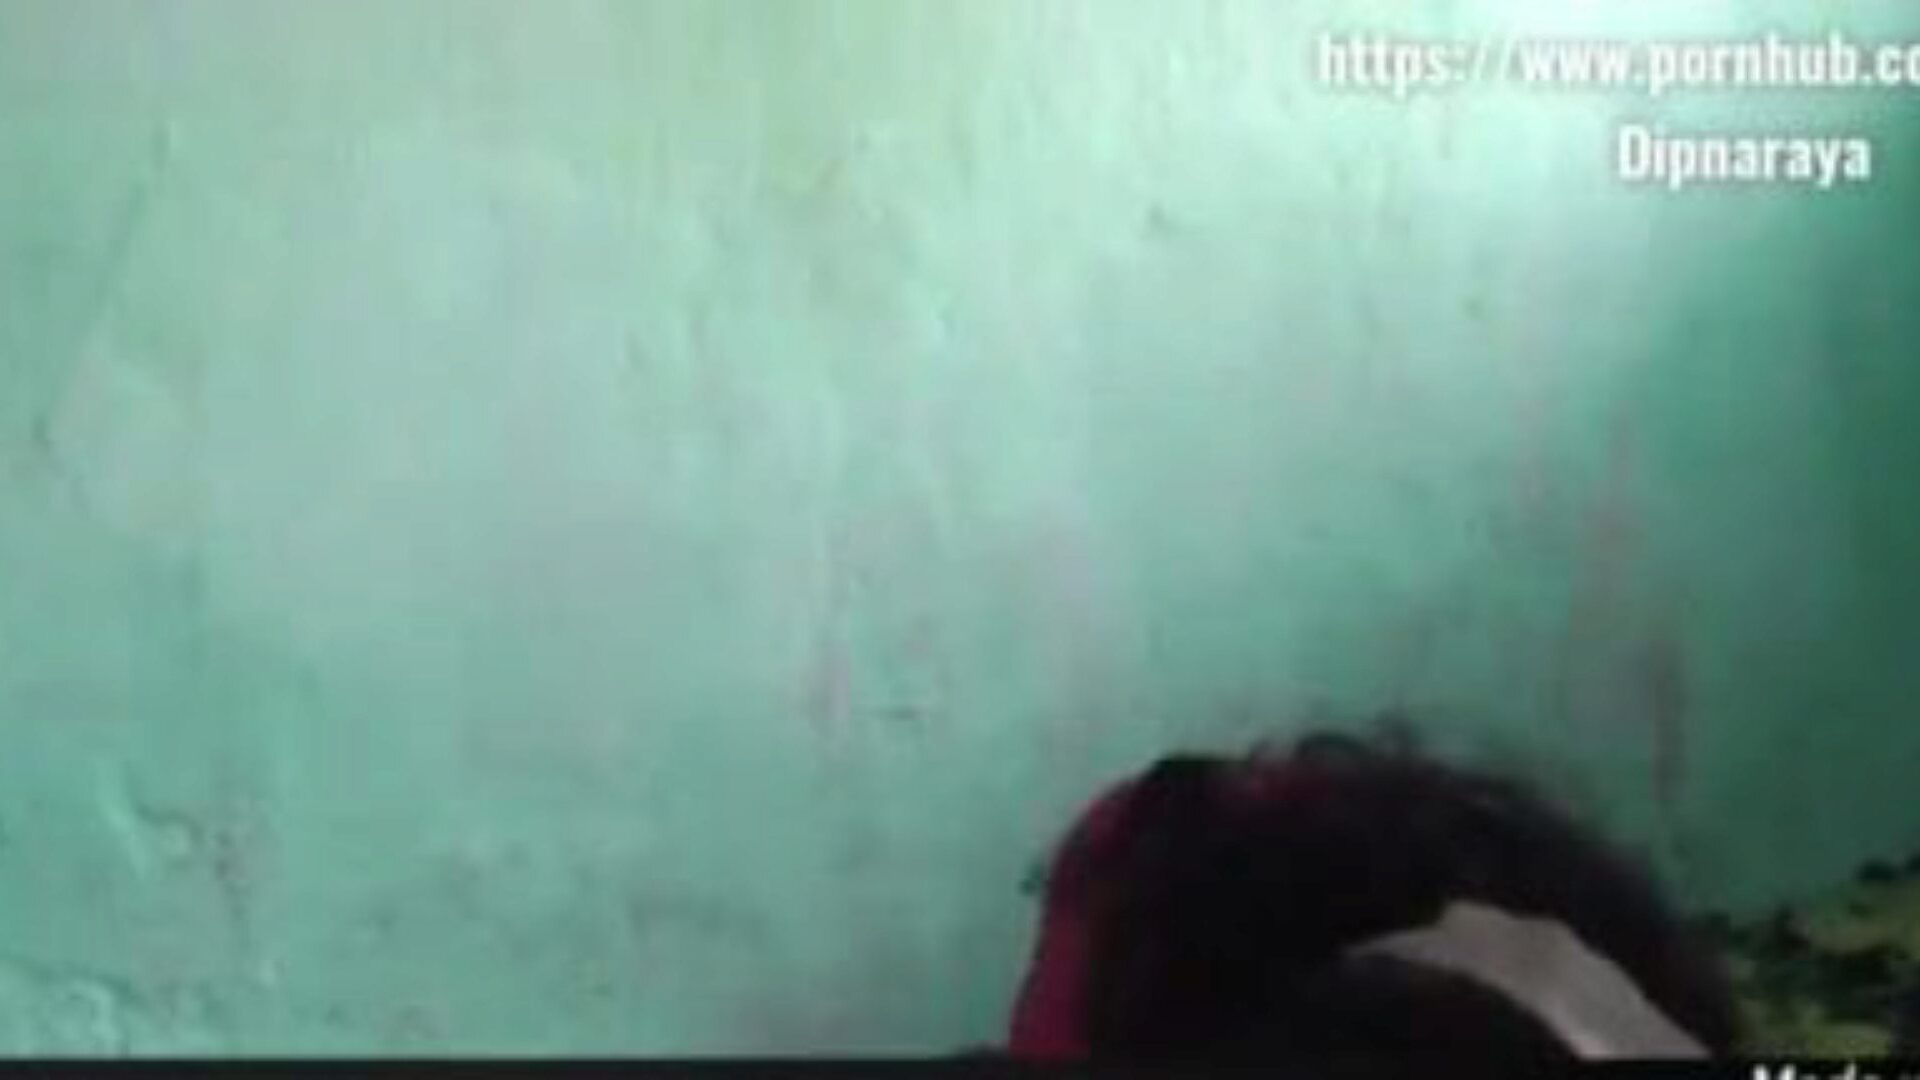 Sexy Indian Village Couple in Homemade Sex Video: Porn c8 Watch Sexy Indian Village Couple in Homemade Sex Video video on xHamster - the ultimate database of free-for-all Asian Xxn Sex gonzo pornography tube movie scenes